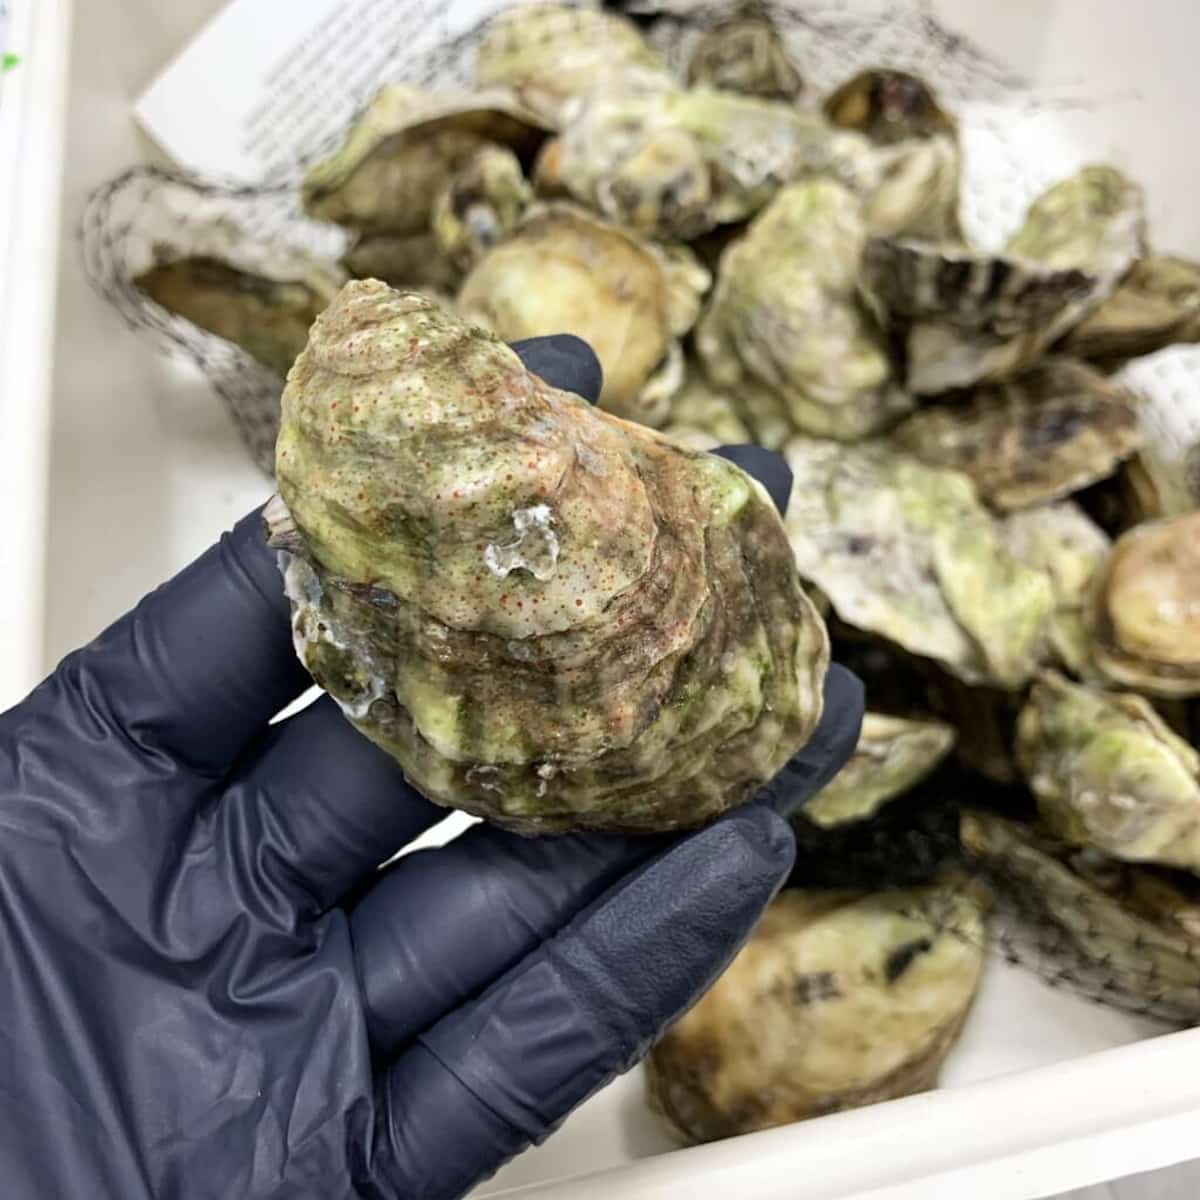 An oyster analyzed in the lab for toxic chemicals